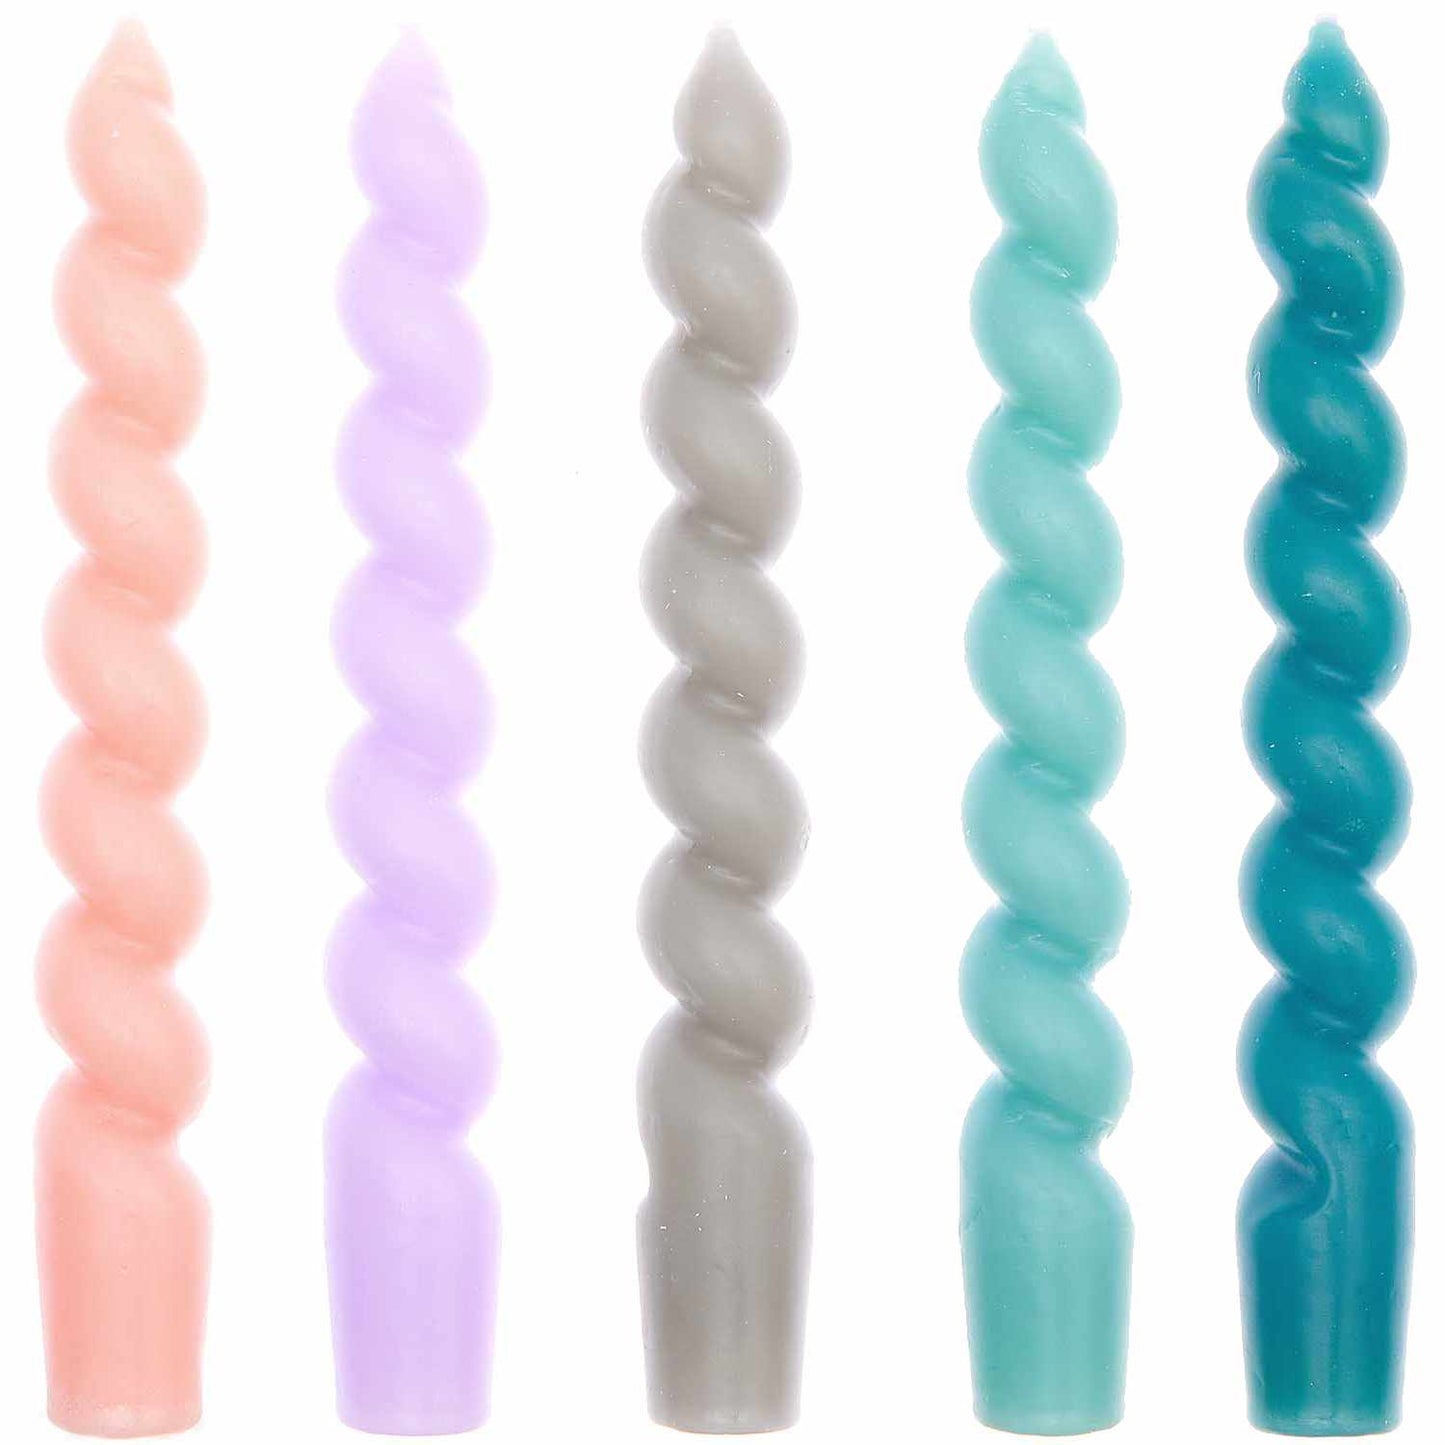 Spiral Candles | Teal Spiral Candles | Pretty Little Party Shop Rico Design